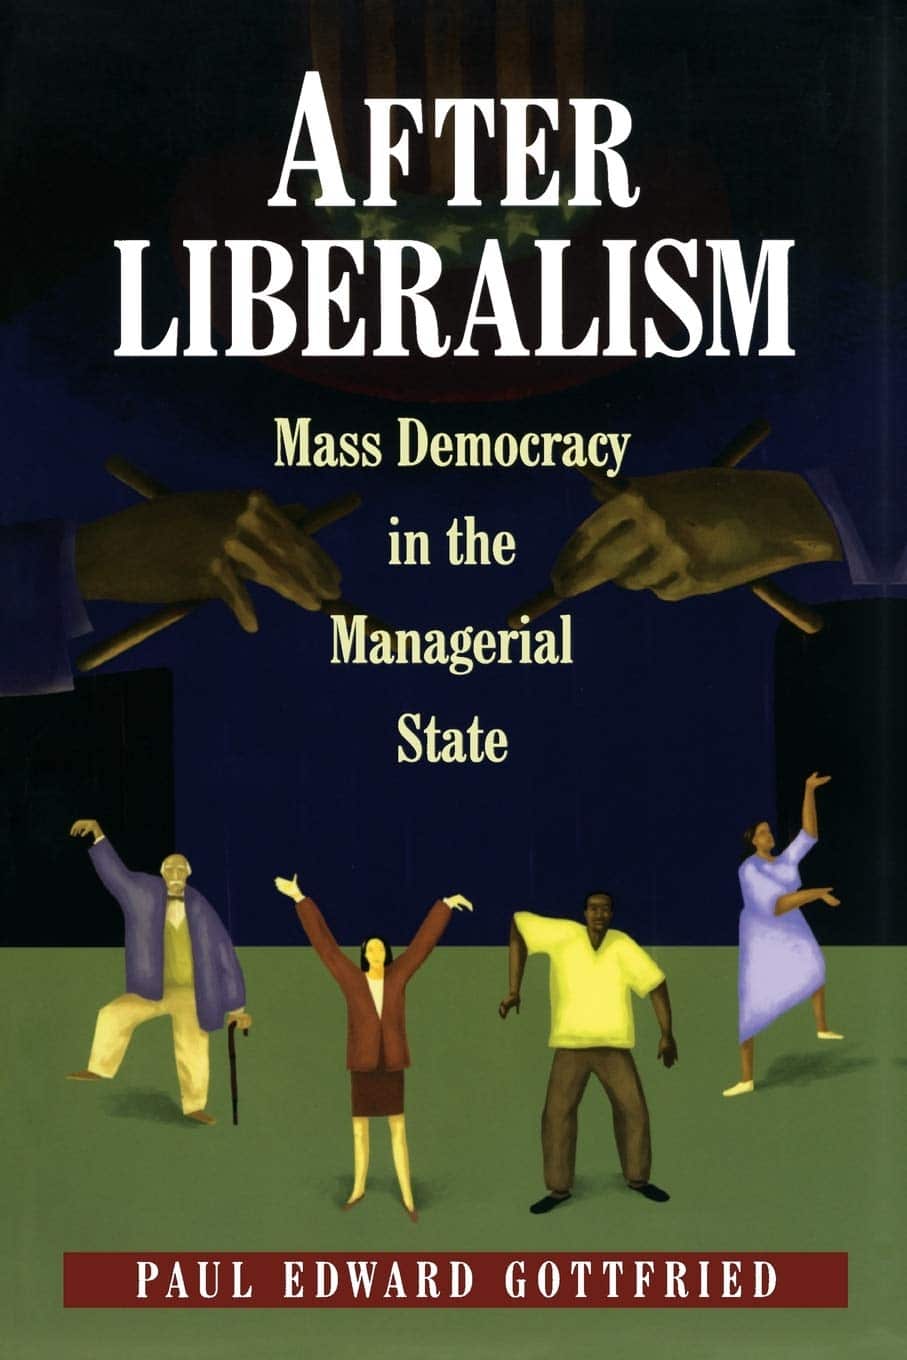 A Reader’s Guide to Liberalism